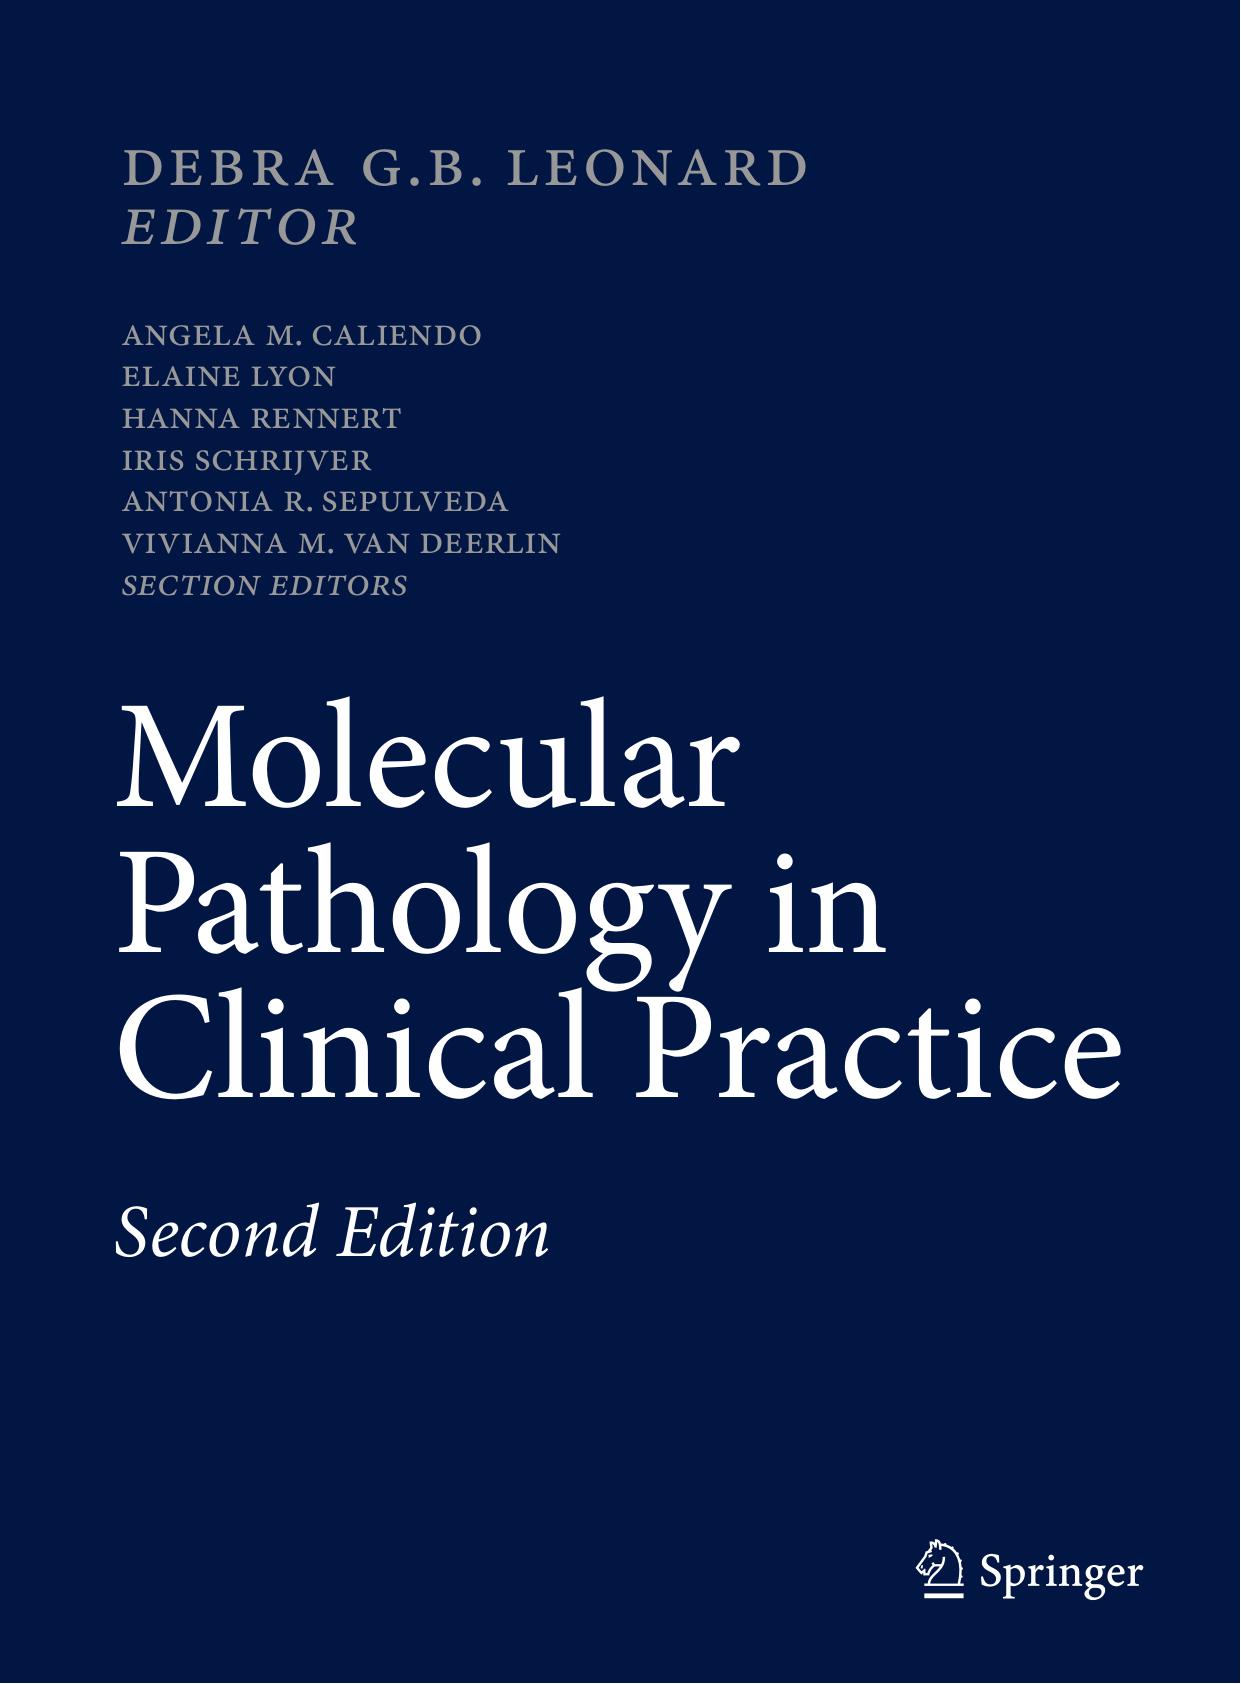 Molecular Pathology in Clinical Practice 2nd ed. 2016.pdf